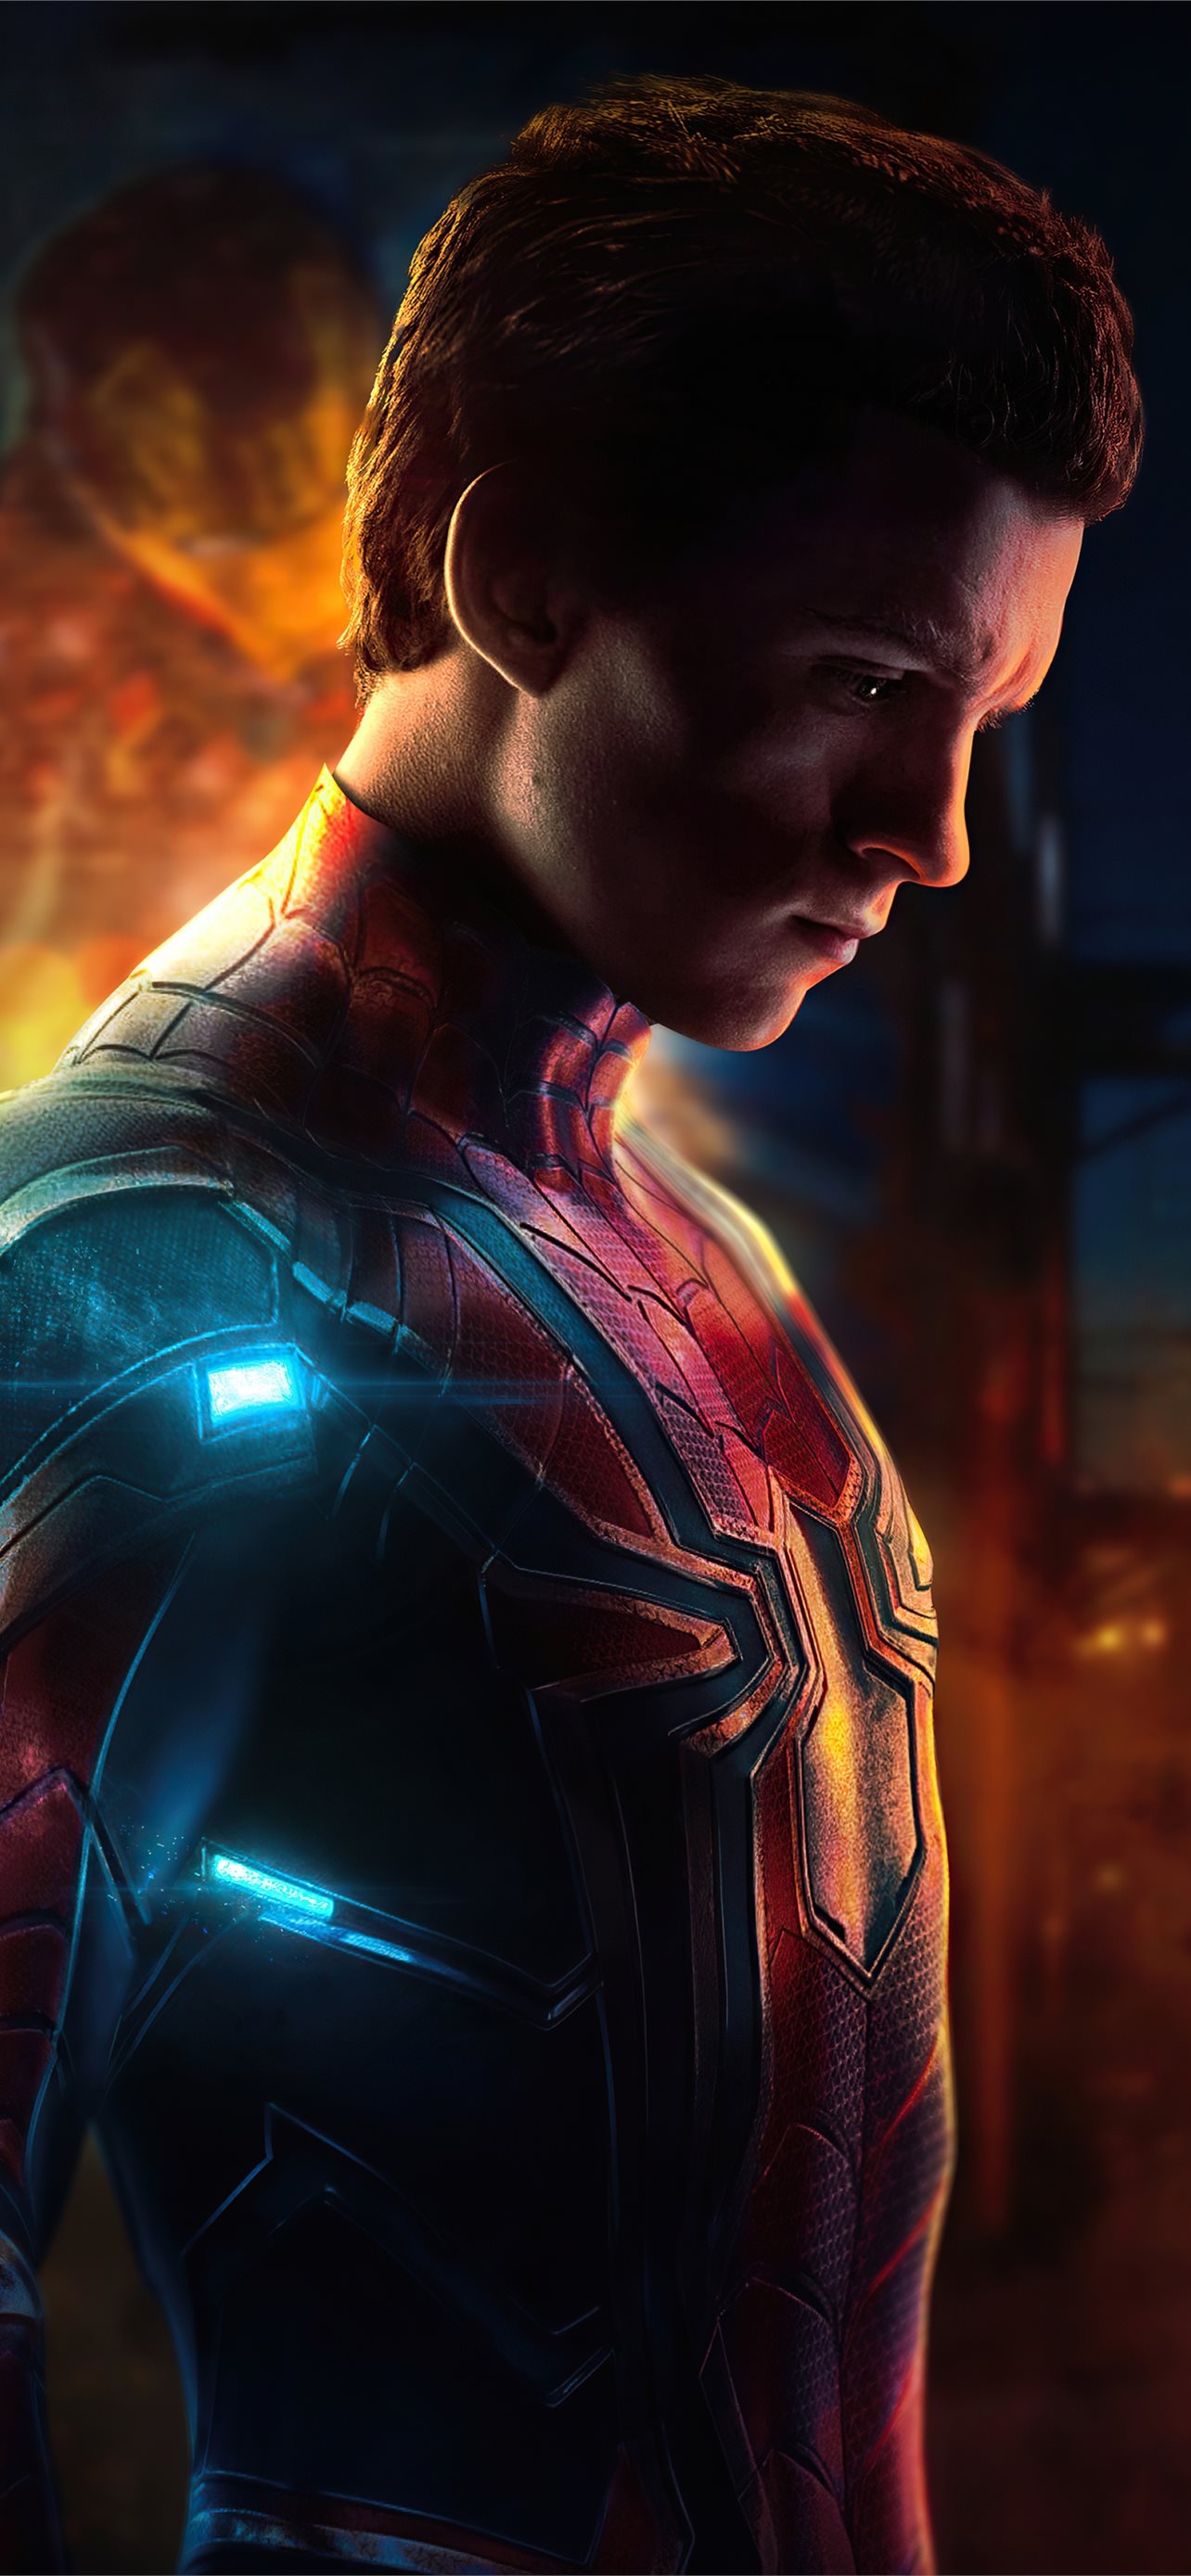 Tom Holland, Spider Man: No Way Home, iPhone wallpapers, Free download, 1290x2780 HD Phone